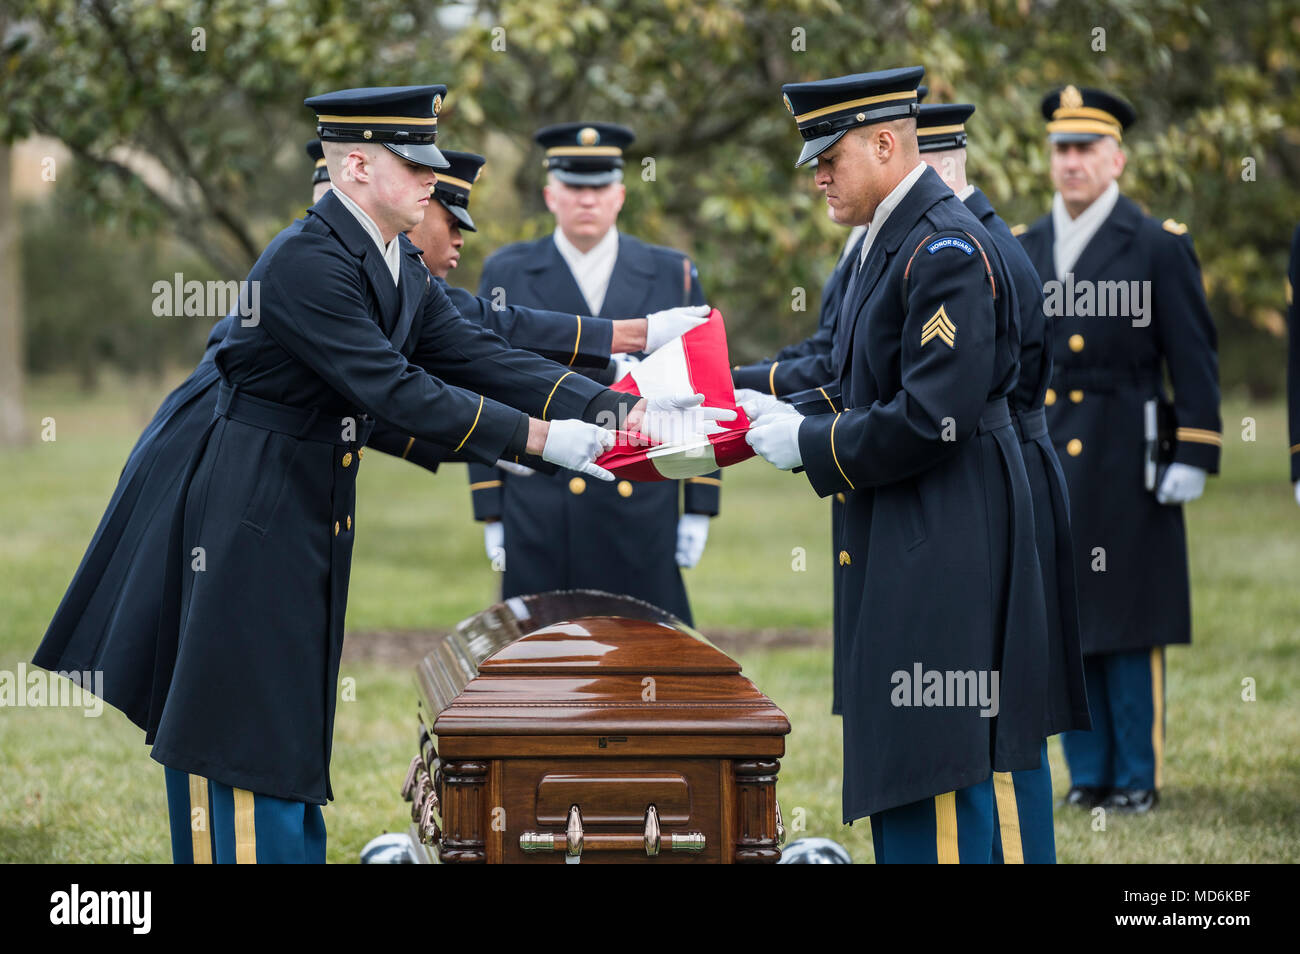 Soldiers from The U.S. Army Honor Guard folder the American flag during the full honors repatriation of U.S. Army Cpl. Dow F. Worden in Section 60 of Arlington National Cemetery, Arlington, Virginia, March 27, 2018.    Worden, 20, from Boardman, Oregon, went unaccounted in late September 1951 during the Korean War. A member of Company A, 1st Battalion, 9th Infantry Regiment, 2nd Infantry Division, Worden’s company was in the vicinity of Hill 1024 in South Korea, conducting operations near an area known as Heartbreak Ridge, when the Chinese launched an attack. The company repelled and was relie Stock Photo